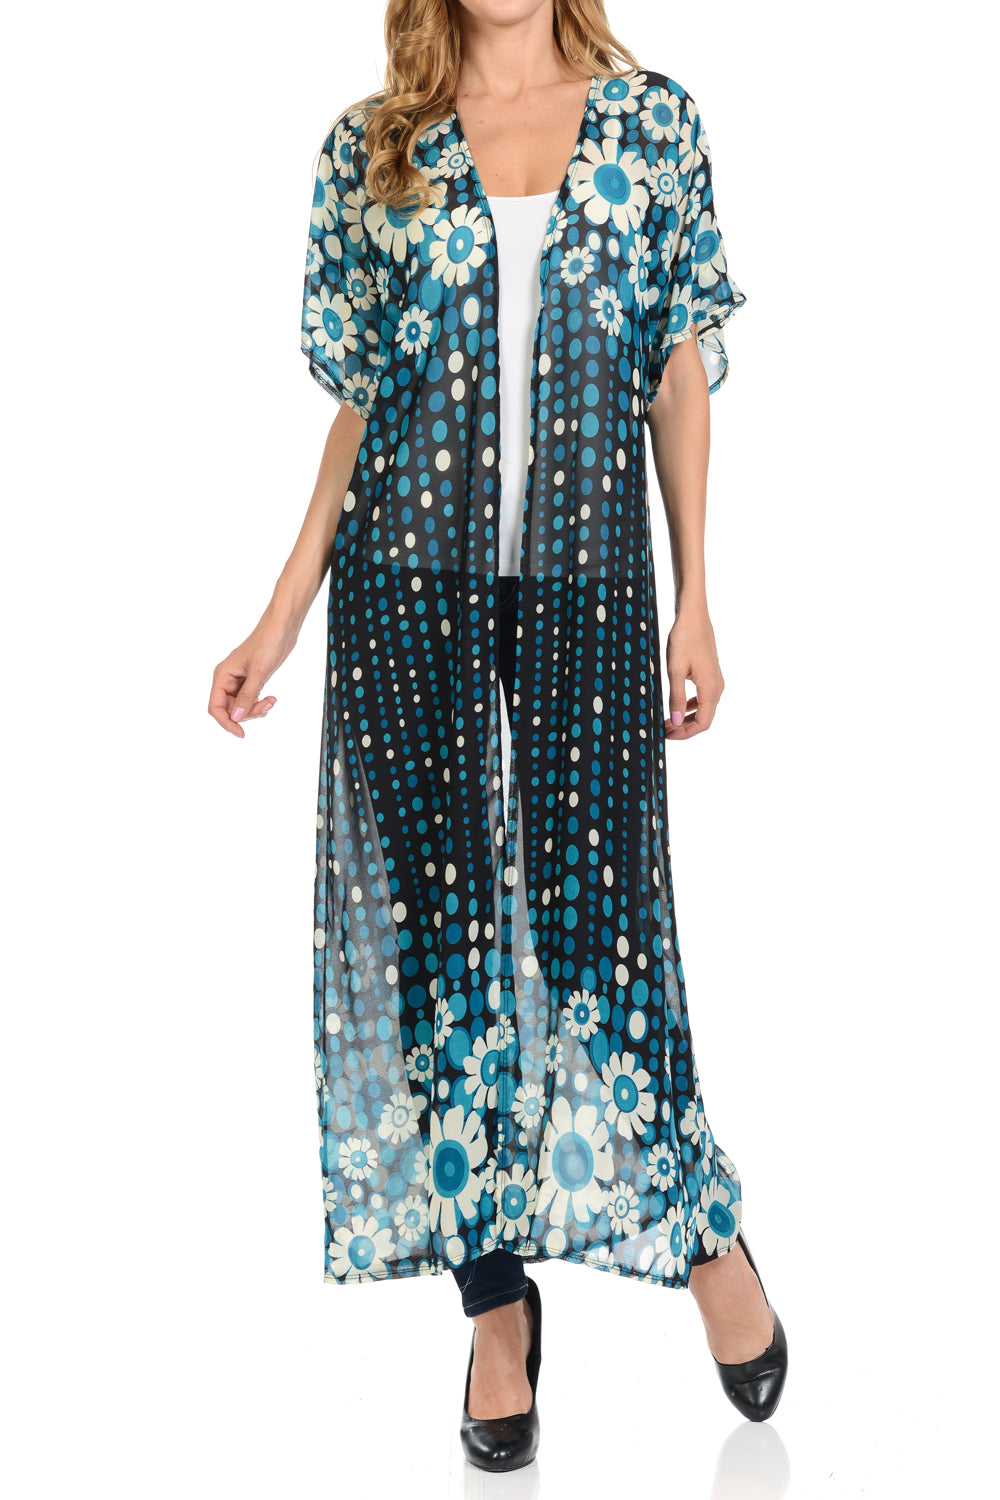 Women's Long maxi Cardigan See through beach cover up Trendy Fashion- BlackTeal Flower Printed Cardigan